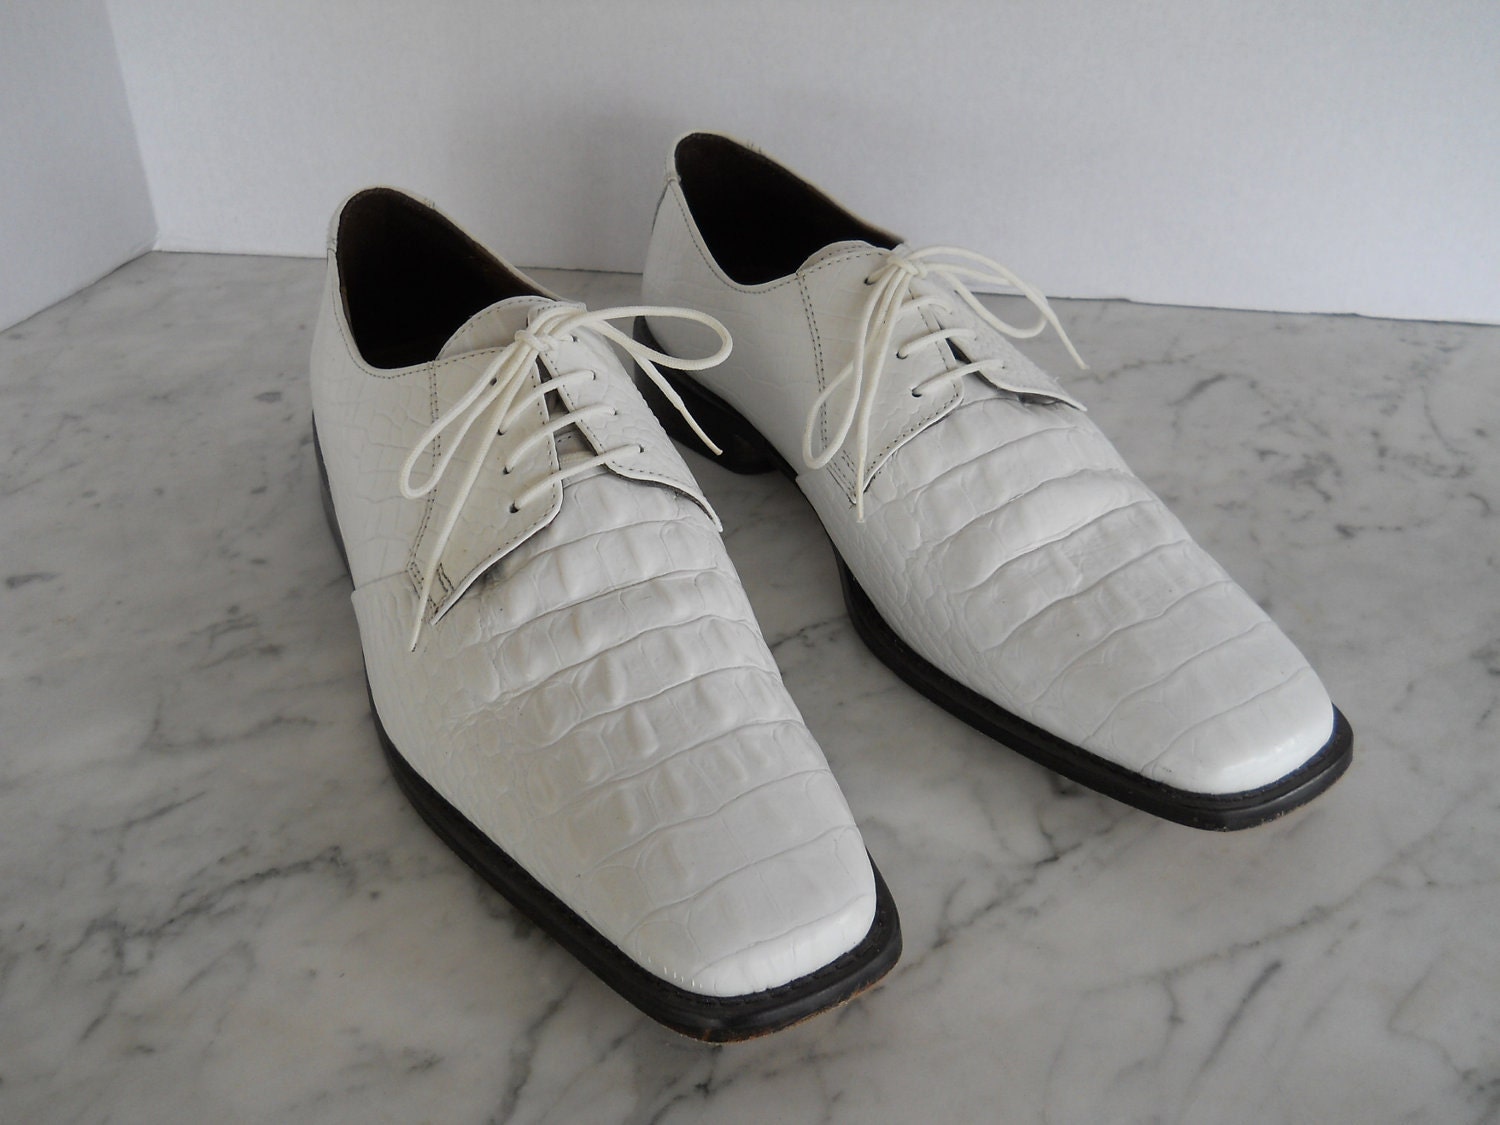 Stacy Adams Fantasy Dress Shoes // White Croco Embossed